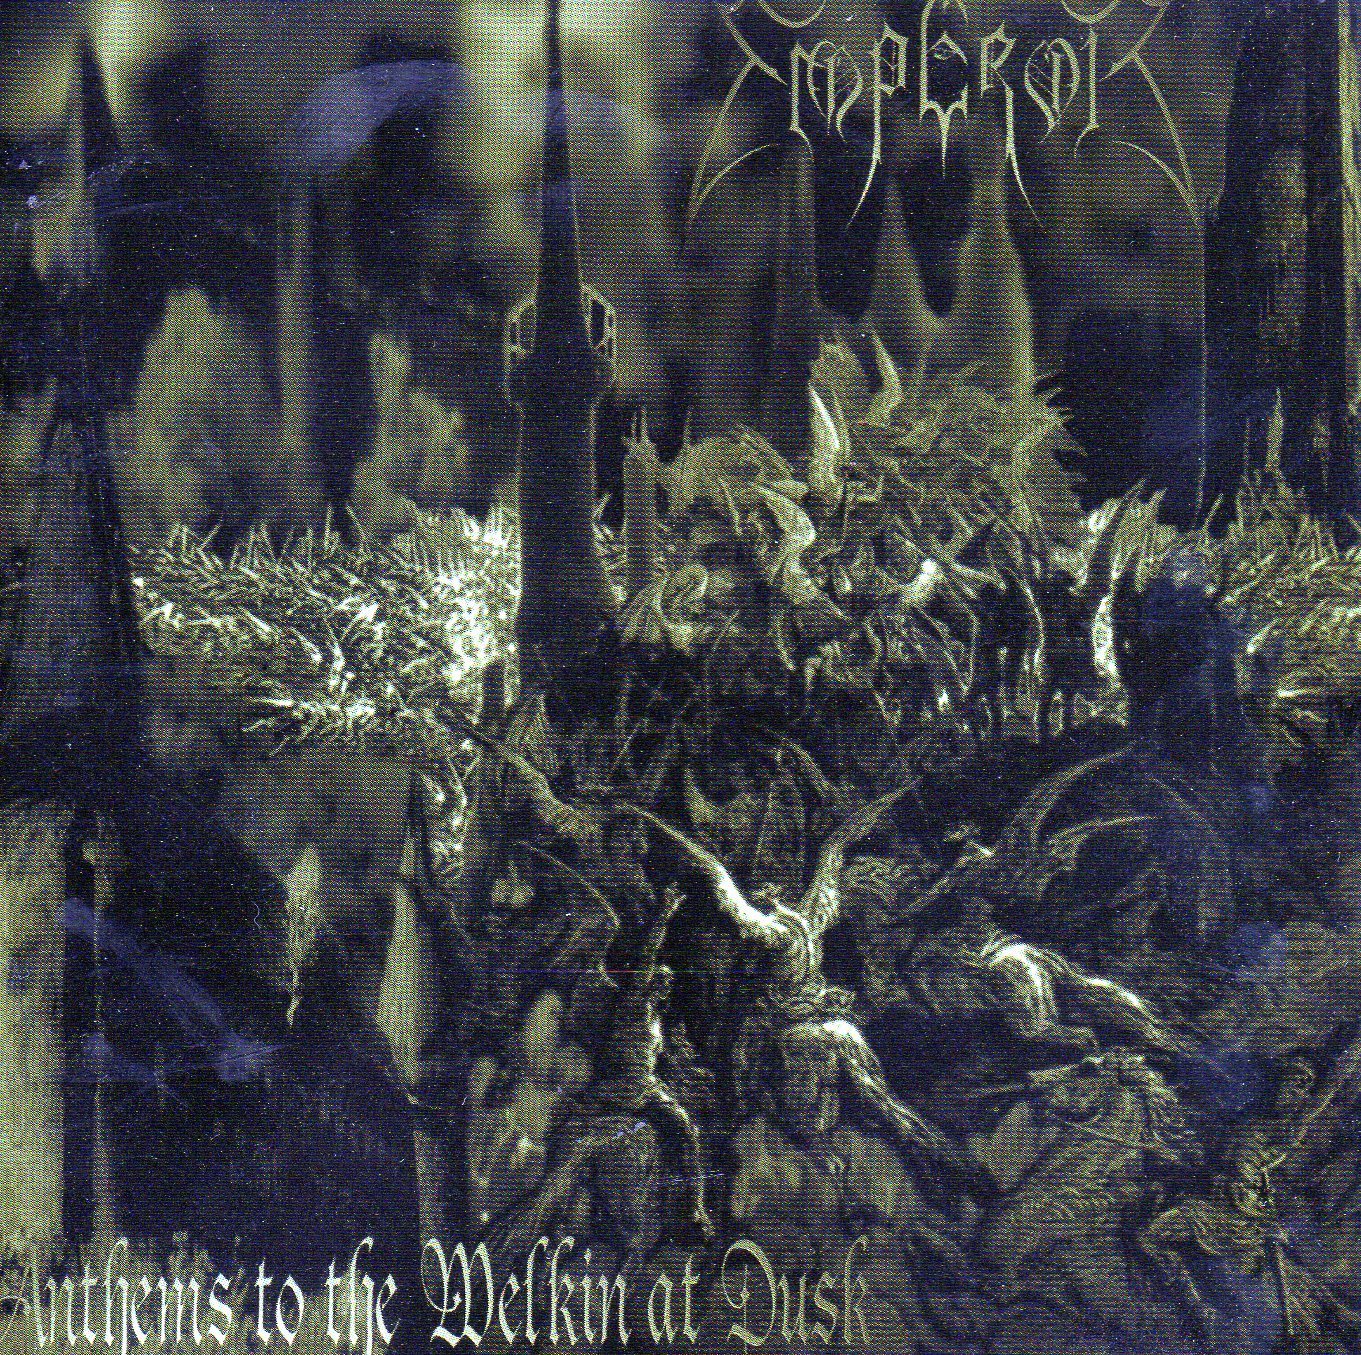 Voices of the void солнце. Emperor Anthems to the Welkin at Dusk. Anthems to the Welkin at Dusk. Voices of the Void.